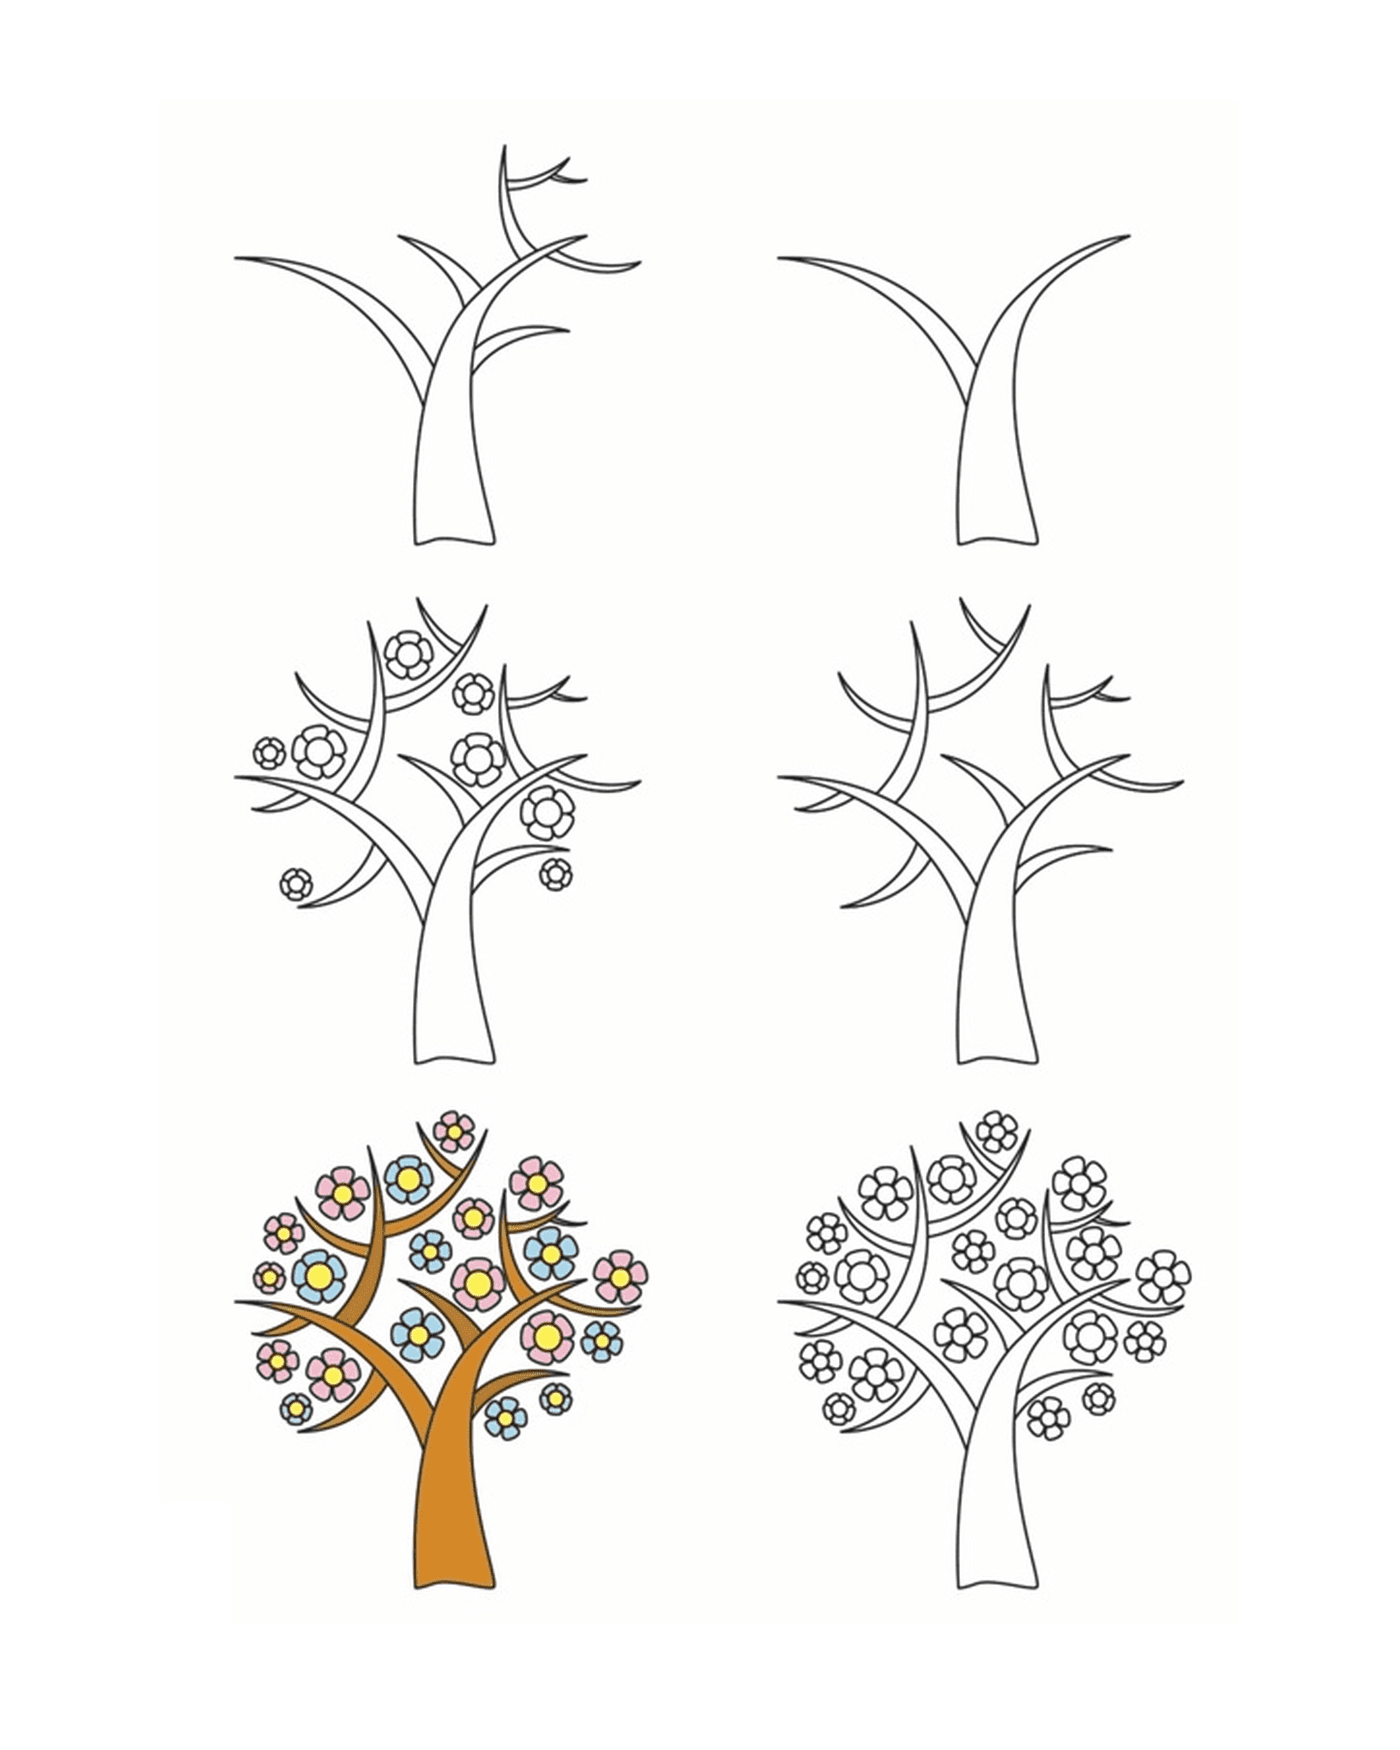  How to draw a tree 